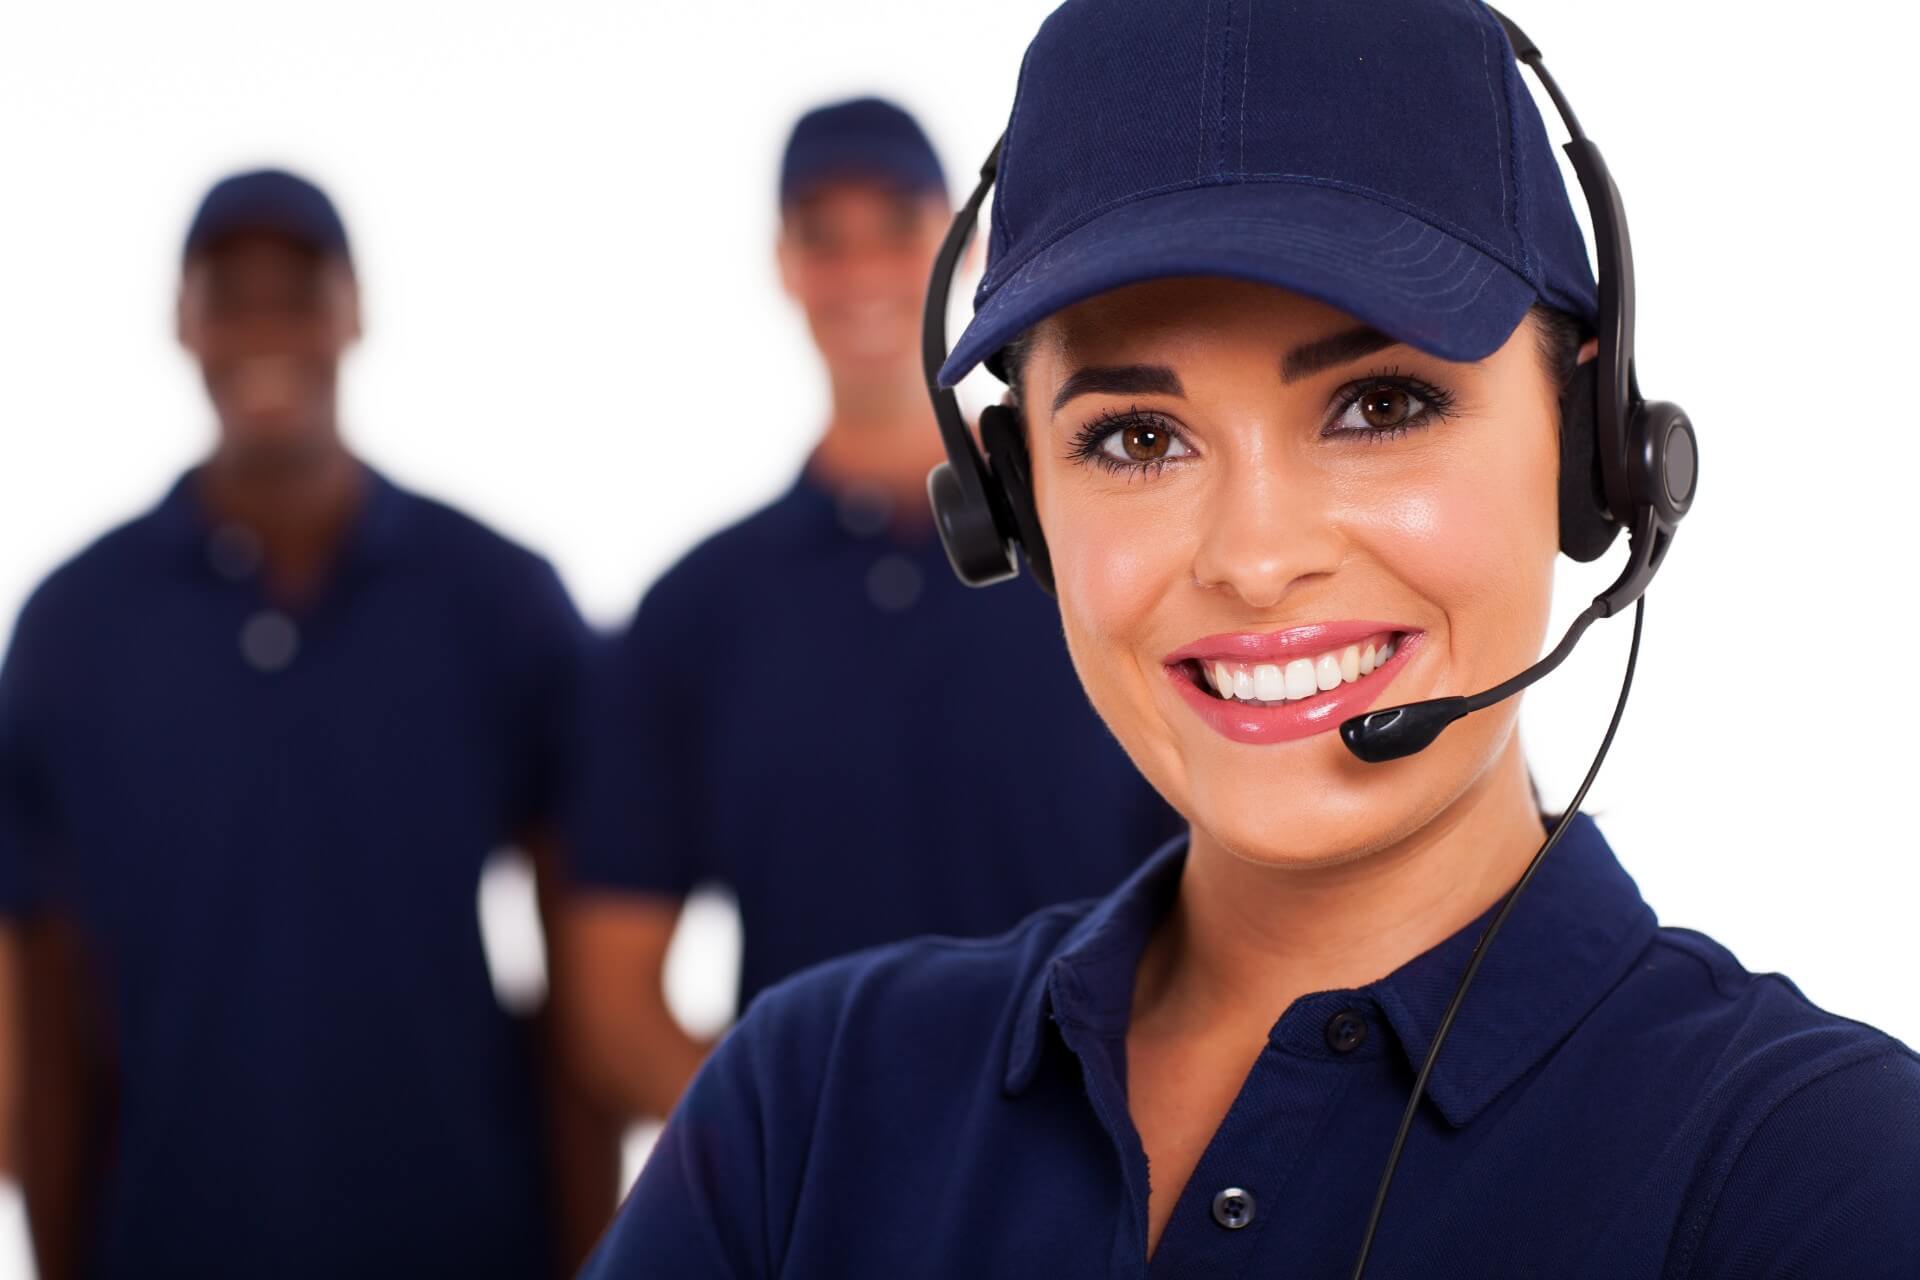 Technical support call center operator and team